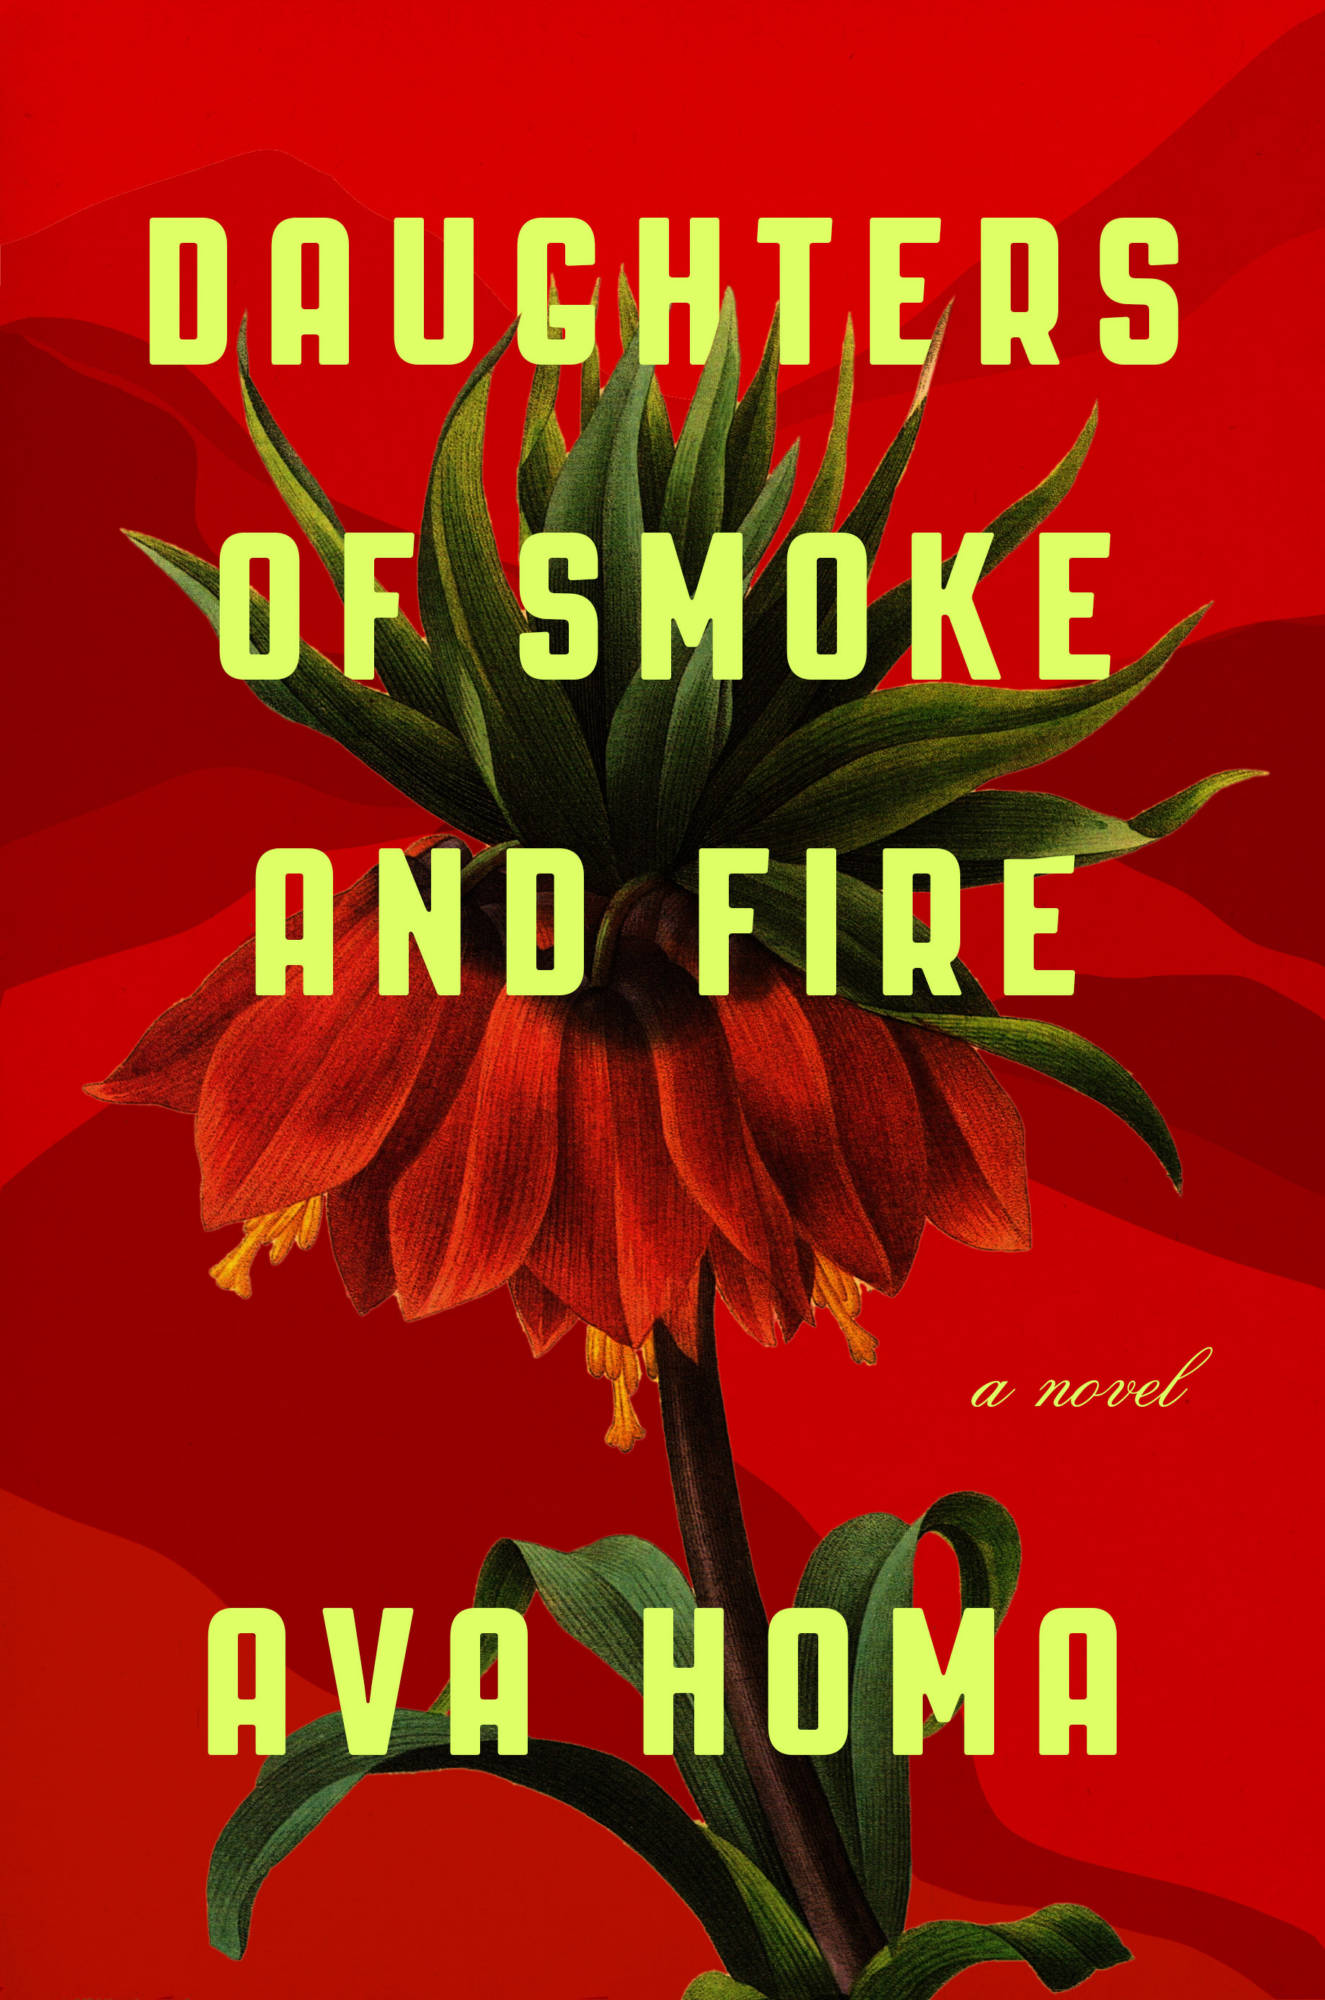 Buchcover of Ava Homa: "Daughters of Smoke and Fire" im Verlag abrams&amp;chronicle